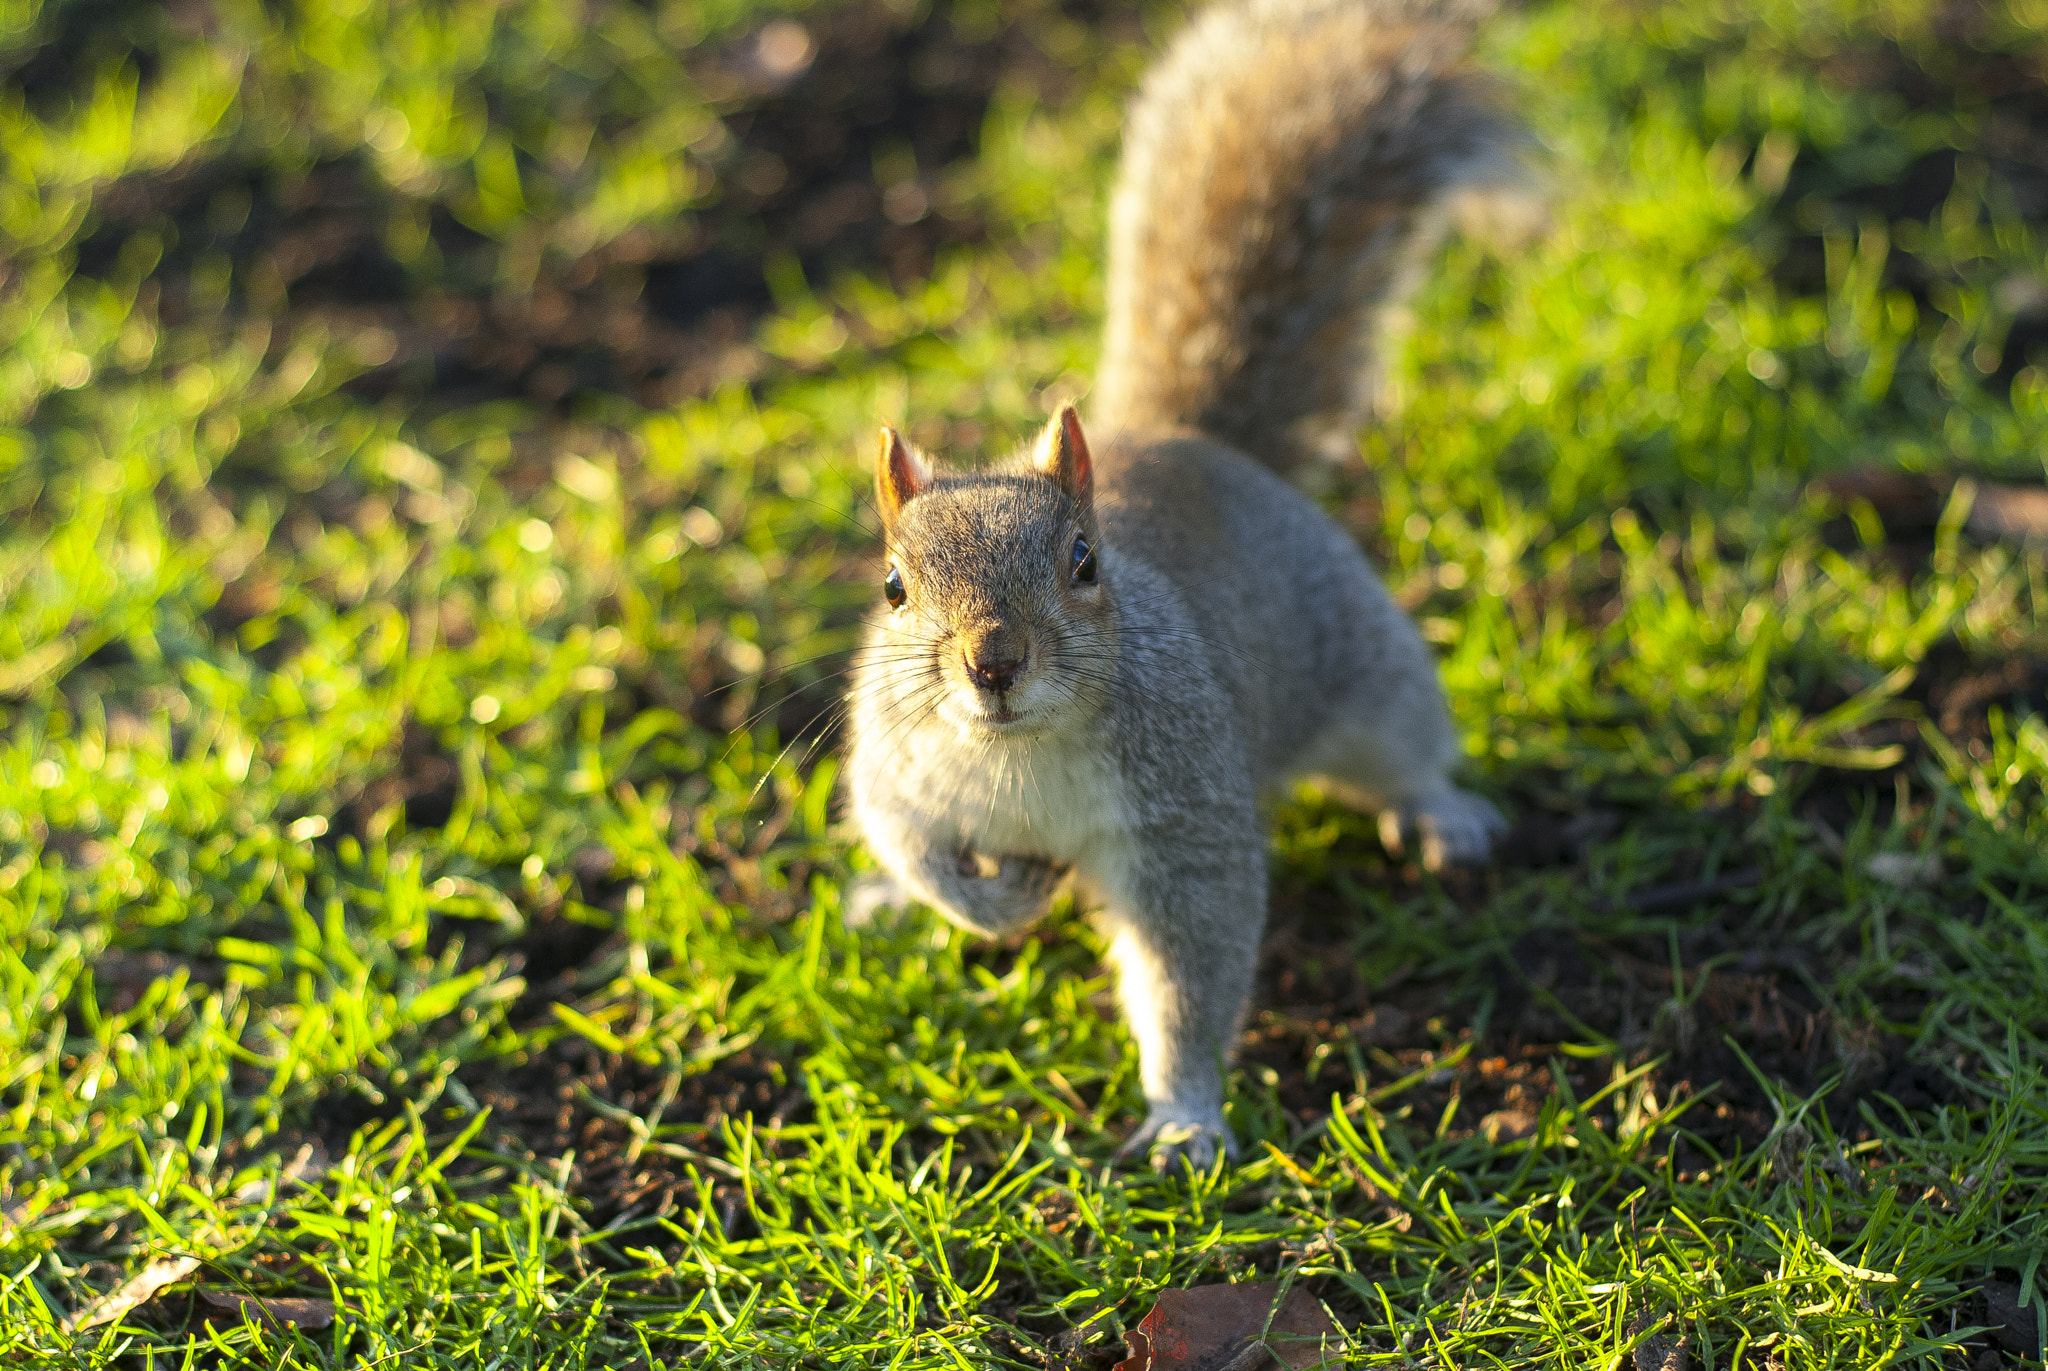 Nikon D200 sample photo. Another wild squirrel photography